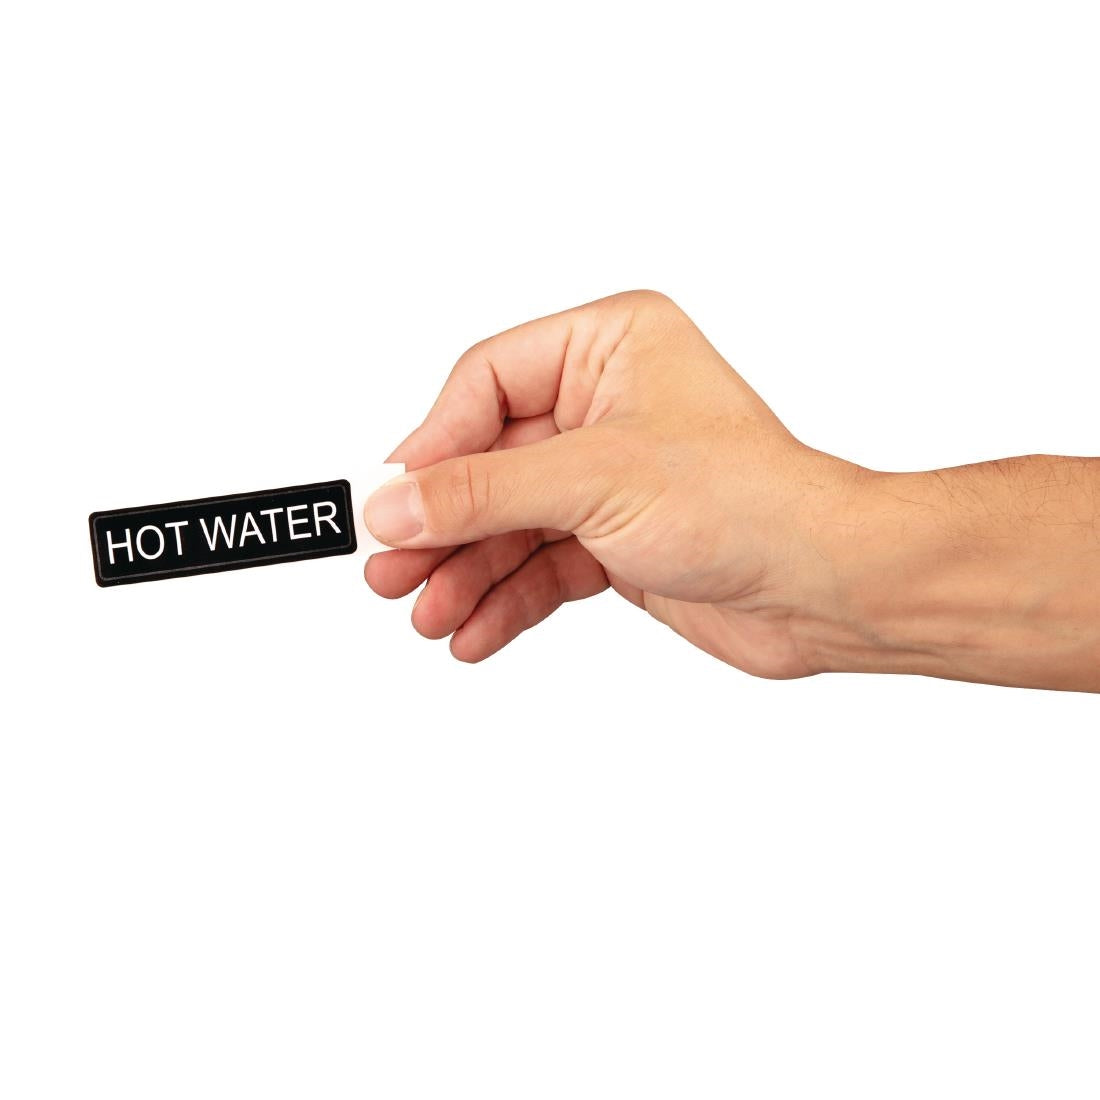 Airpot Hot Water Label